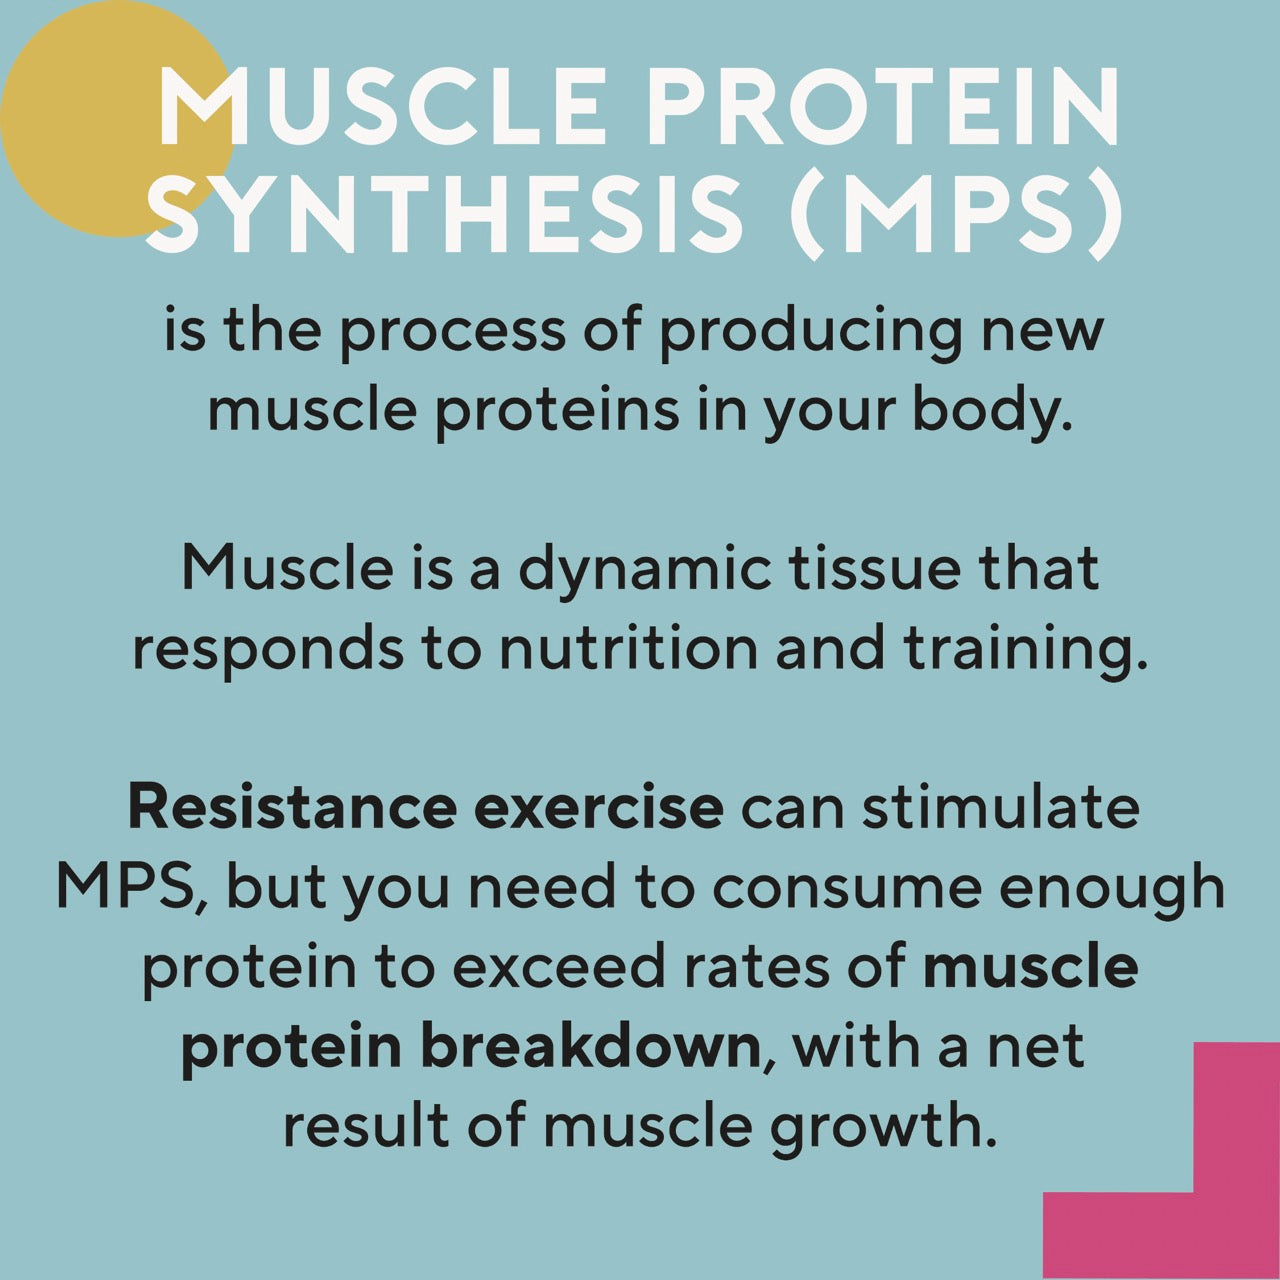 What is Muscle Protein Synthesis